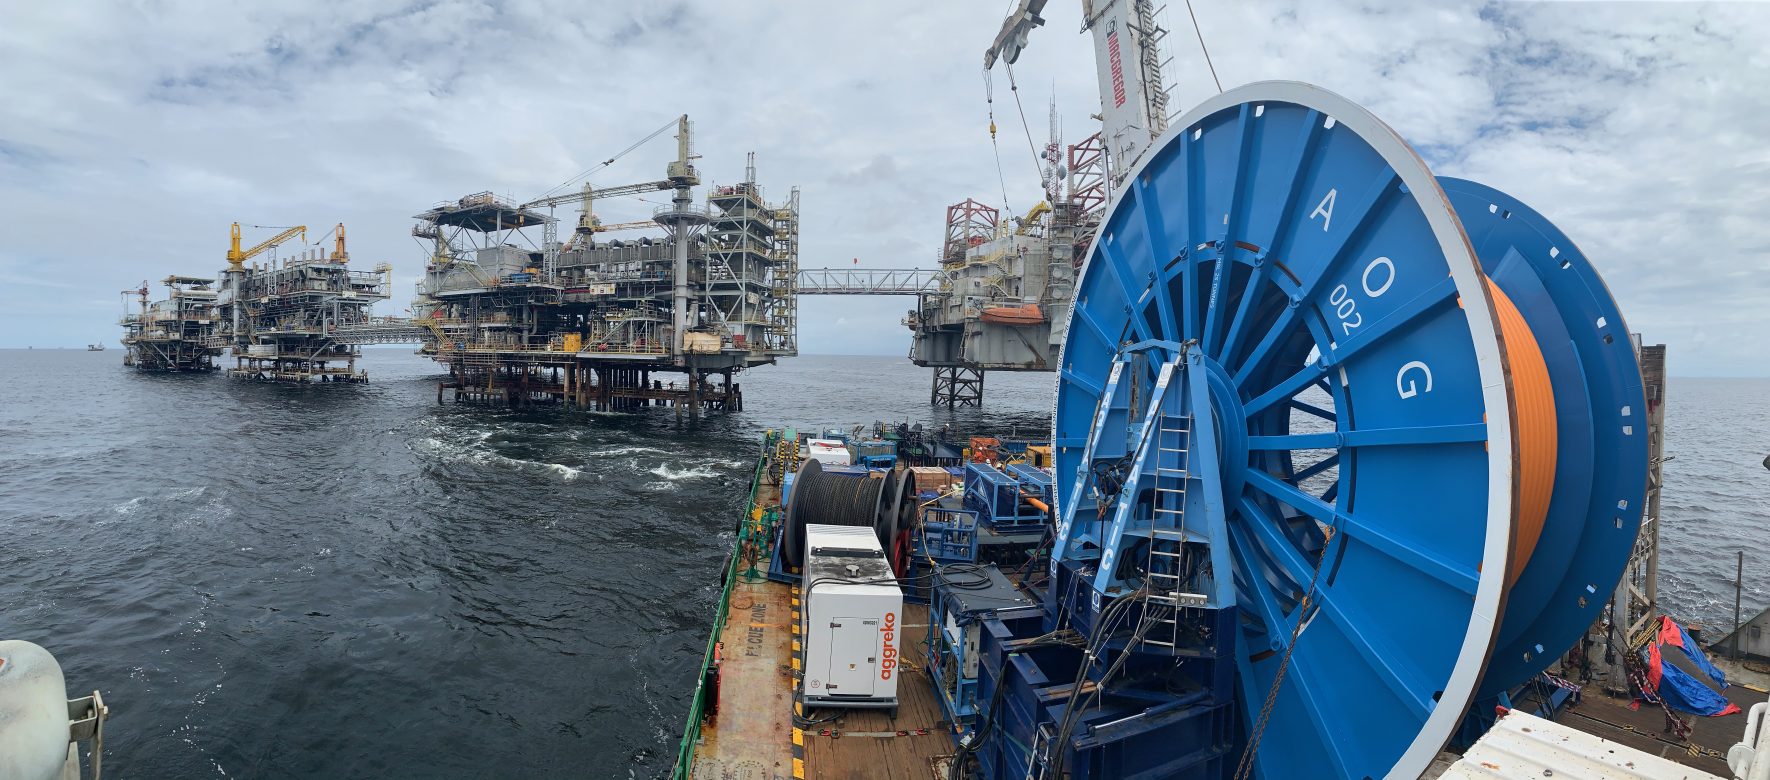 The Installation of a TCP Flowline Offshore Angola